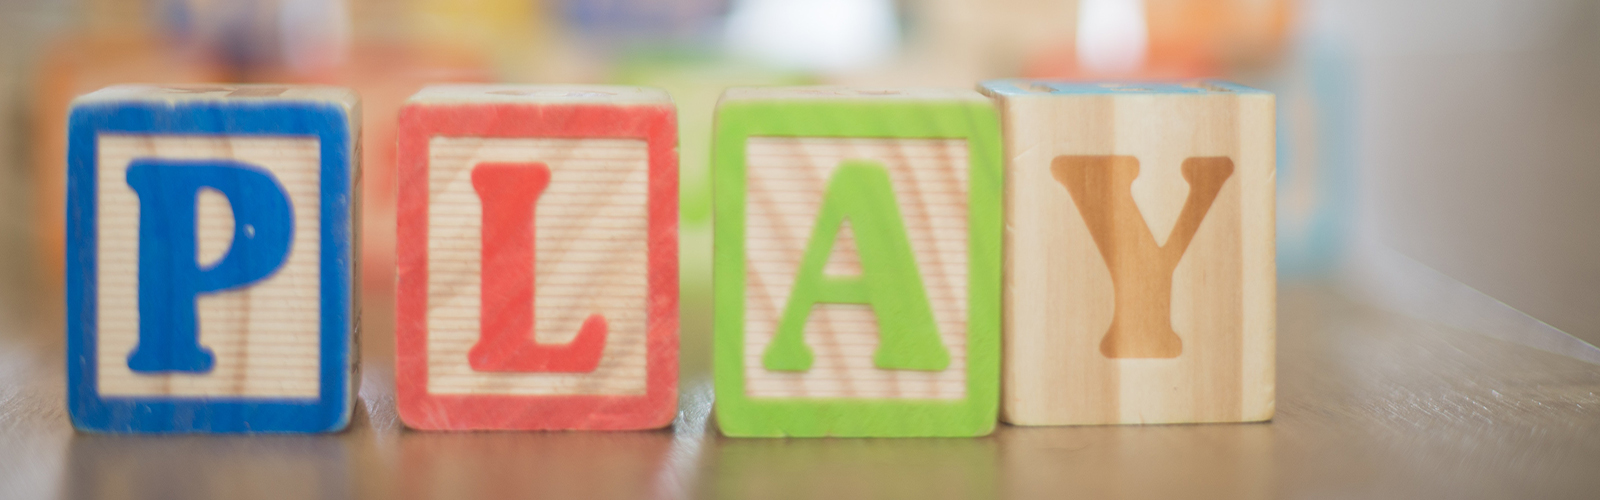 Play spelled out in kids blocks